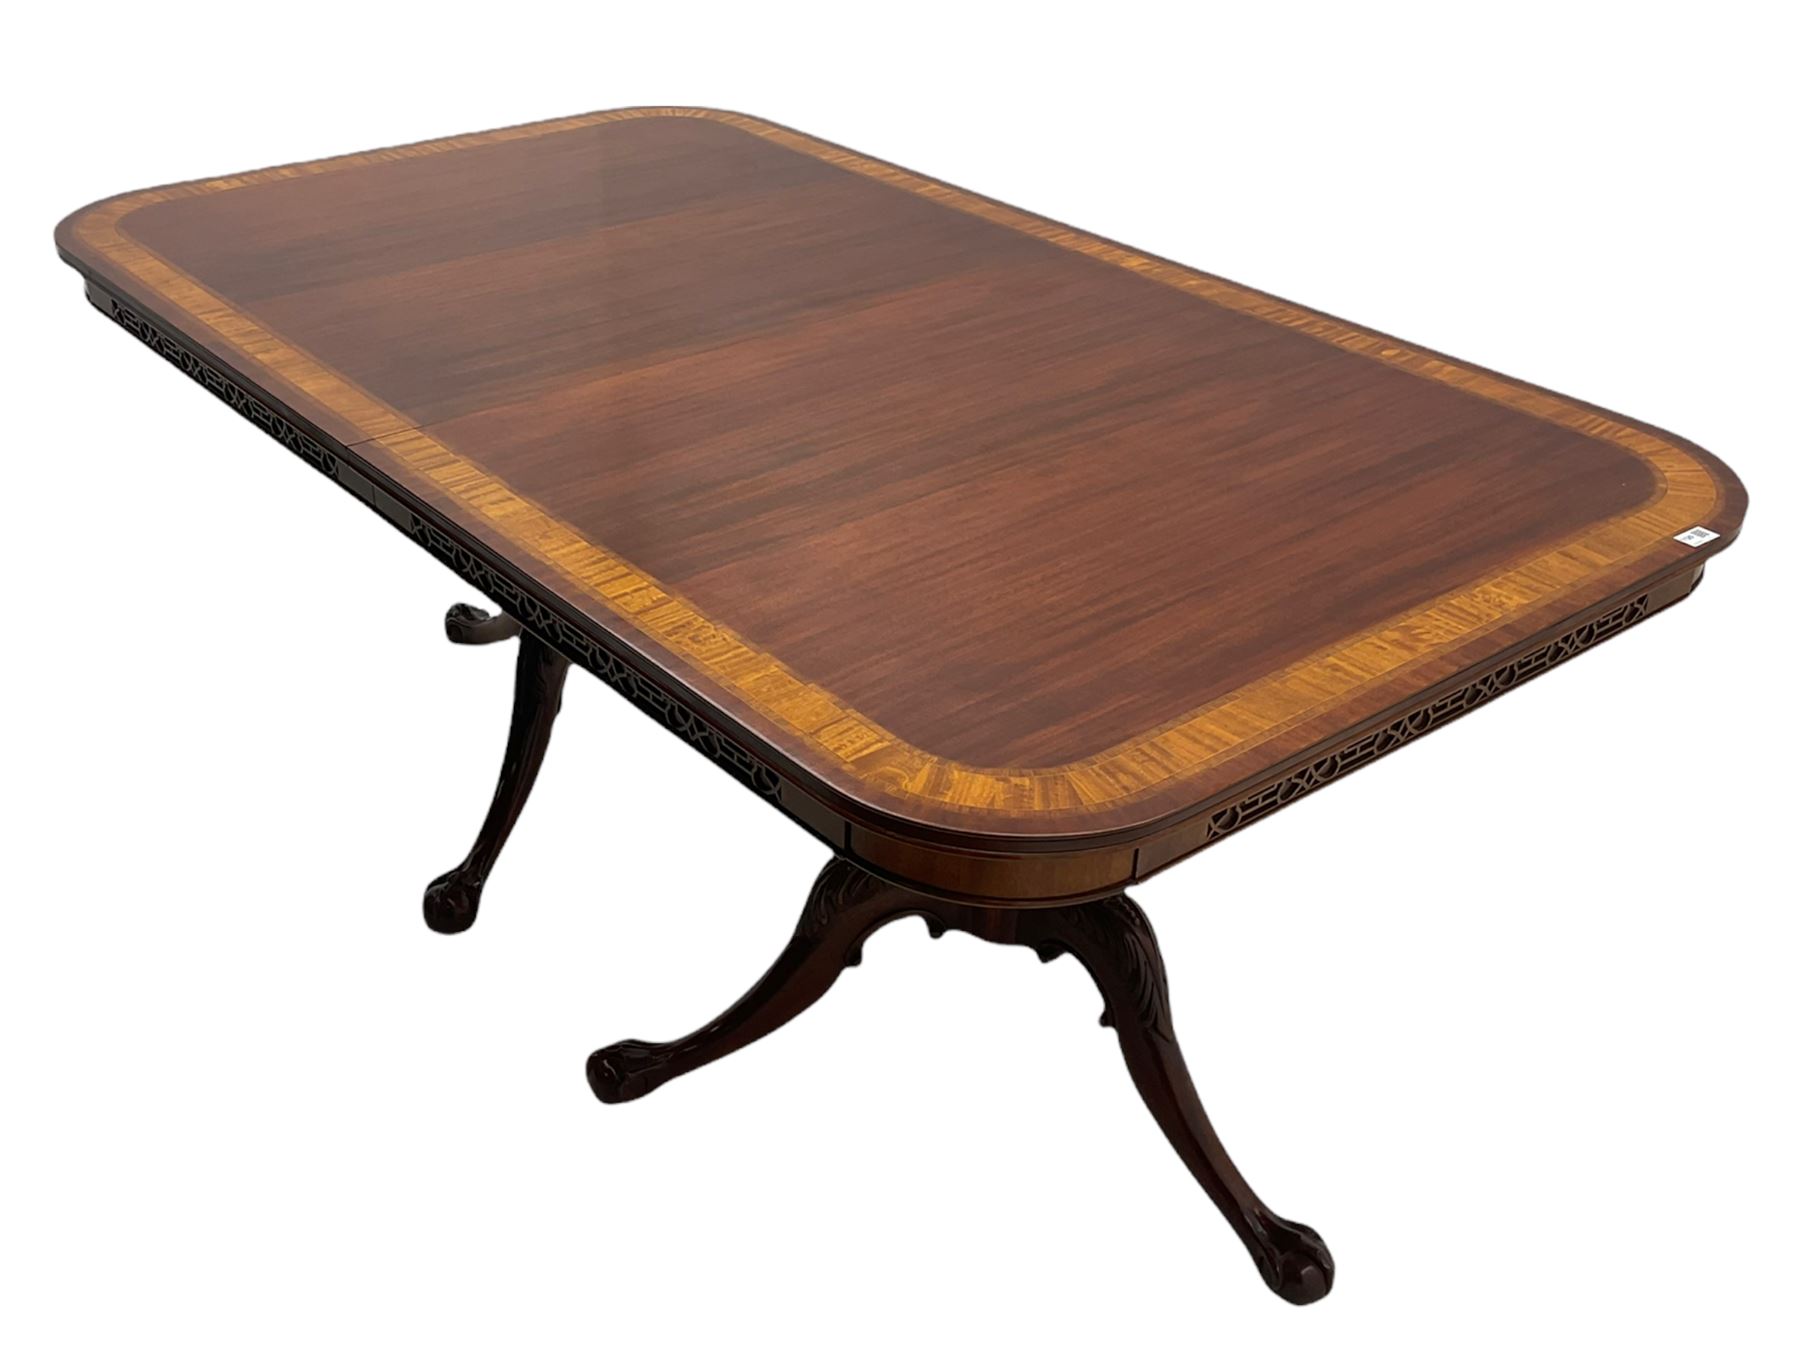 Wade Georgian style mahogany extending dining table with leaf - Image 11 of 27